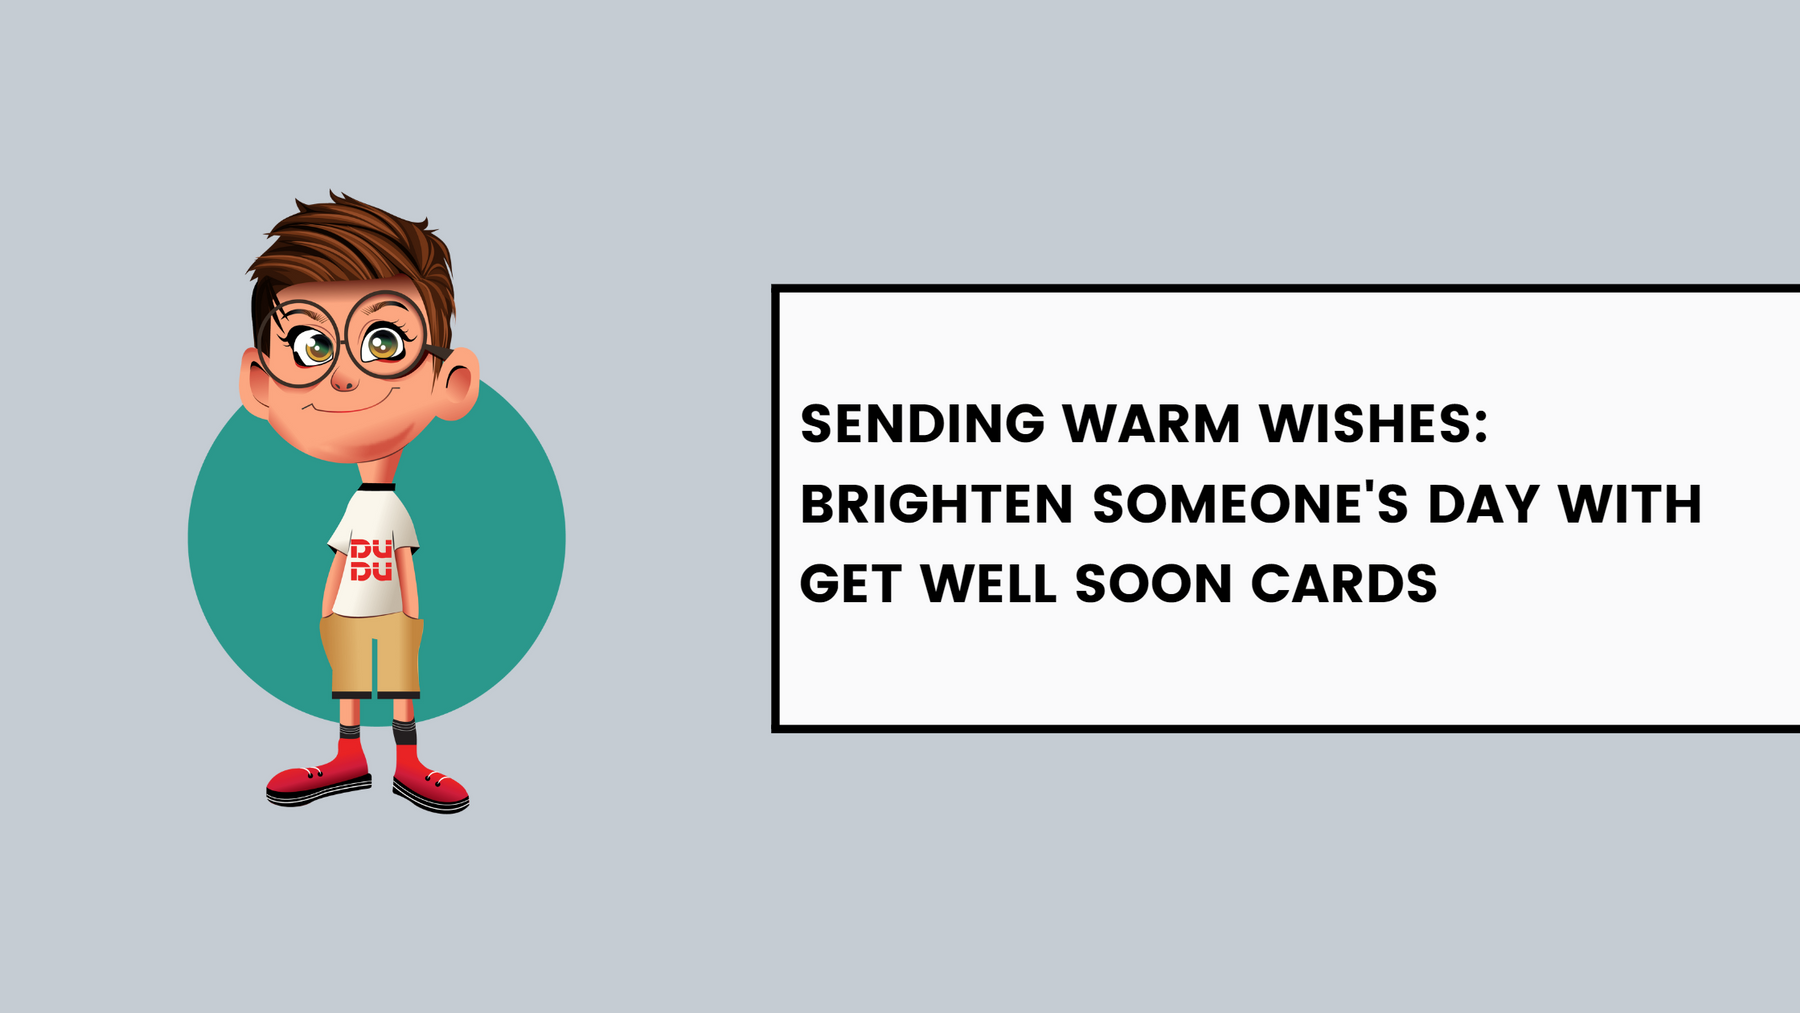 Sending Warm Wishes: Brighten Someone's Day with Get Well Soon Cards